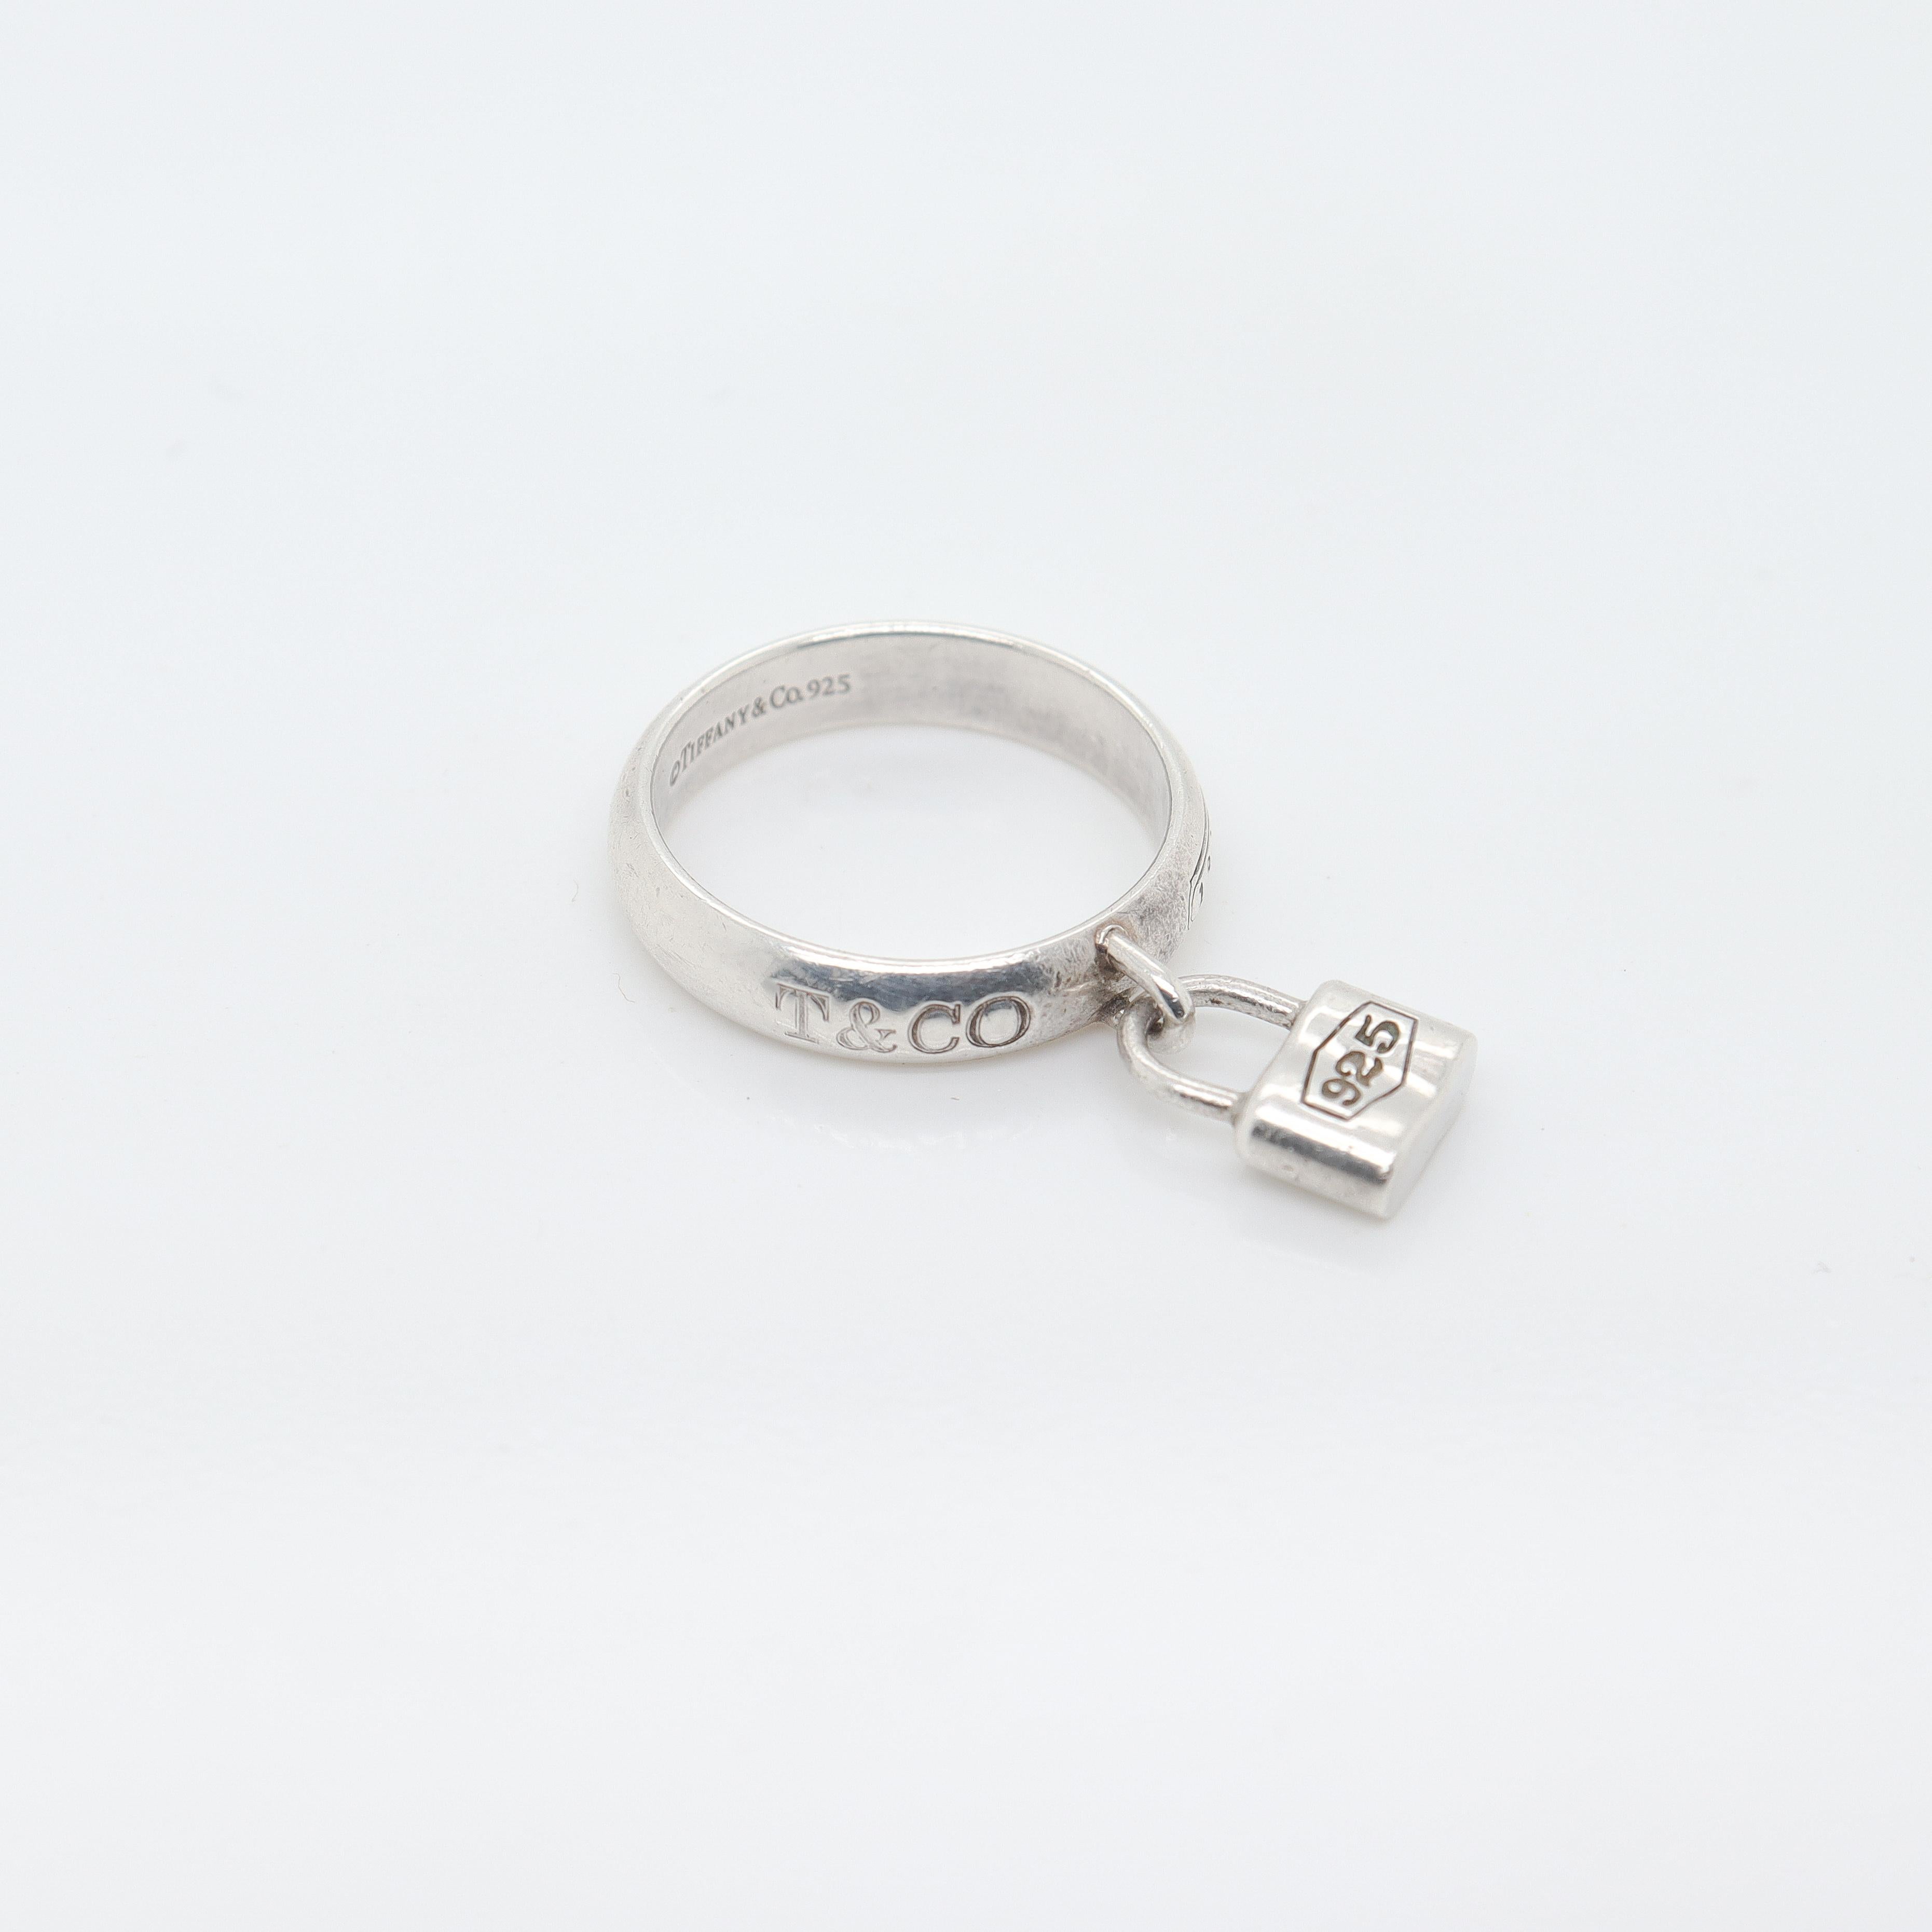 Tiffany & Co Sterling Silver 1837 Lock Charm Band Ring 4